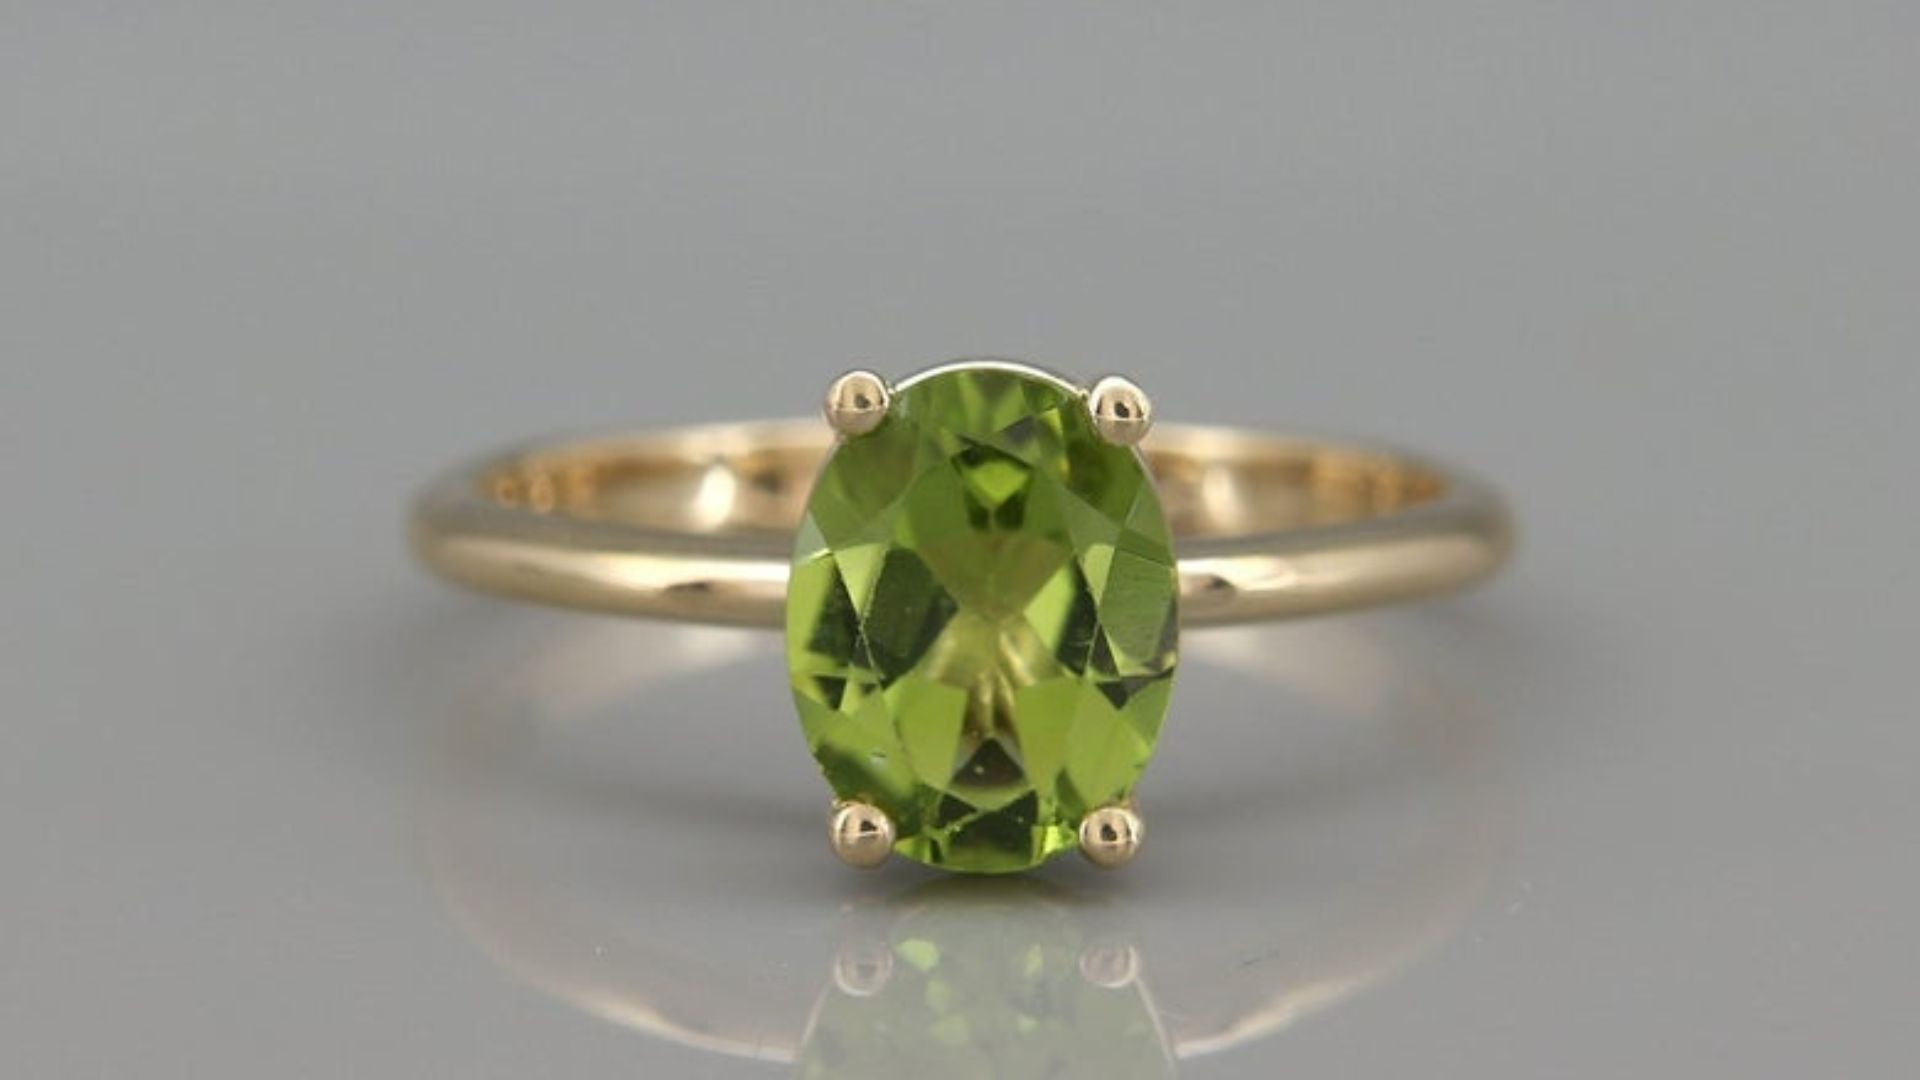 Peridot Rings - Captivating Gemstone For Your Fingers